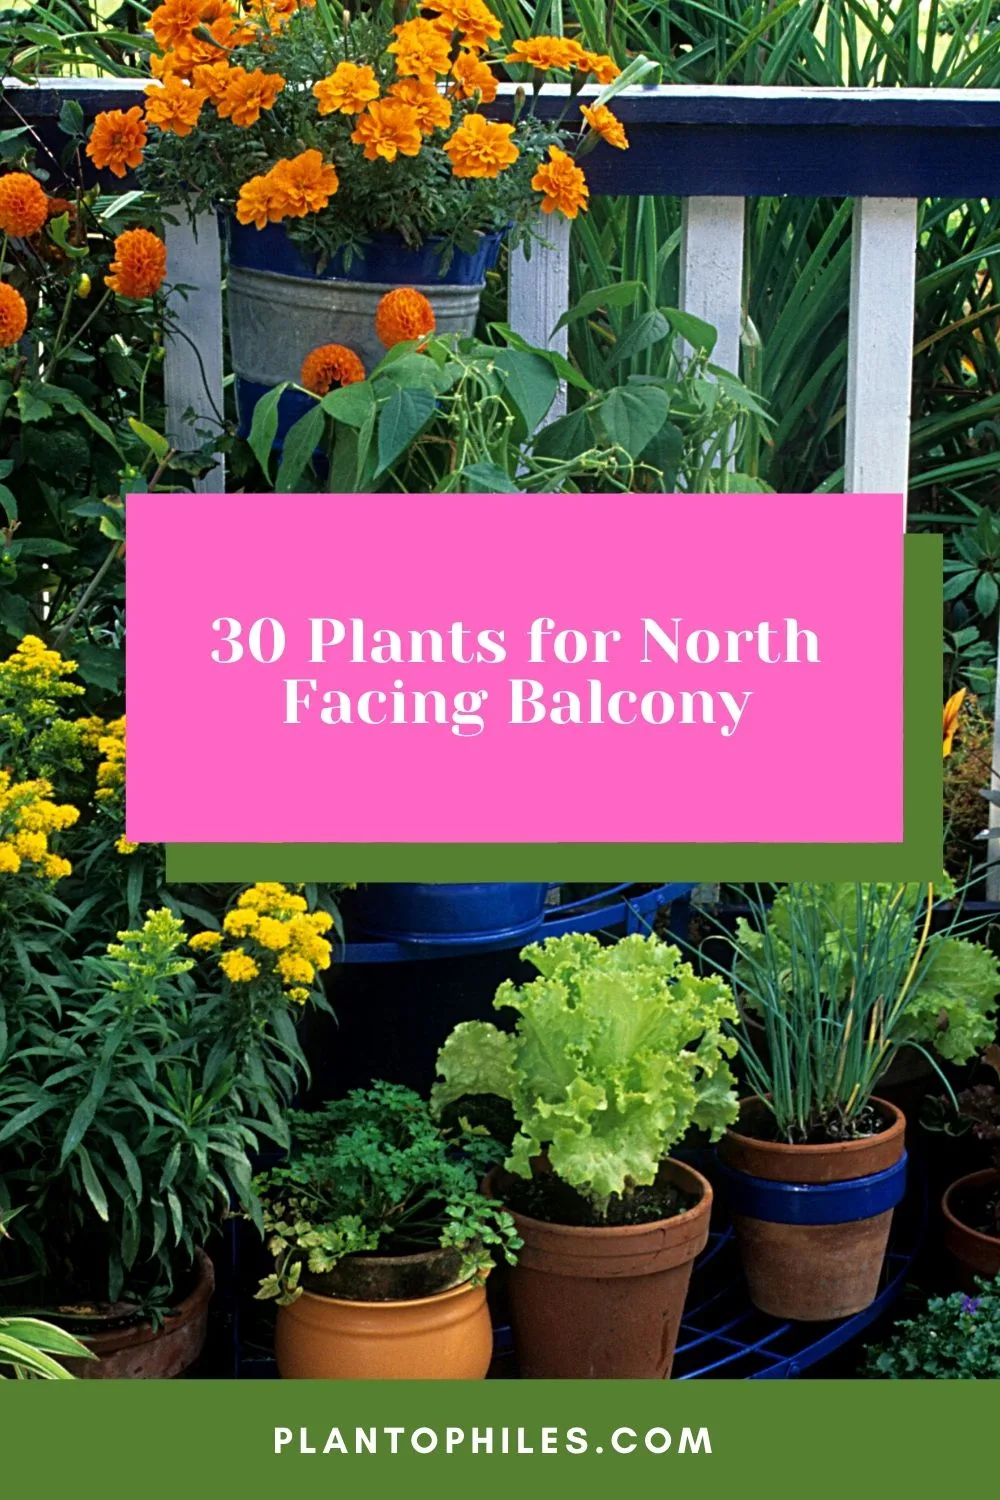 30 Plants for North Facing Balcony